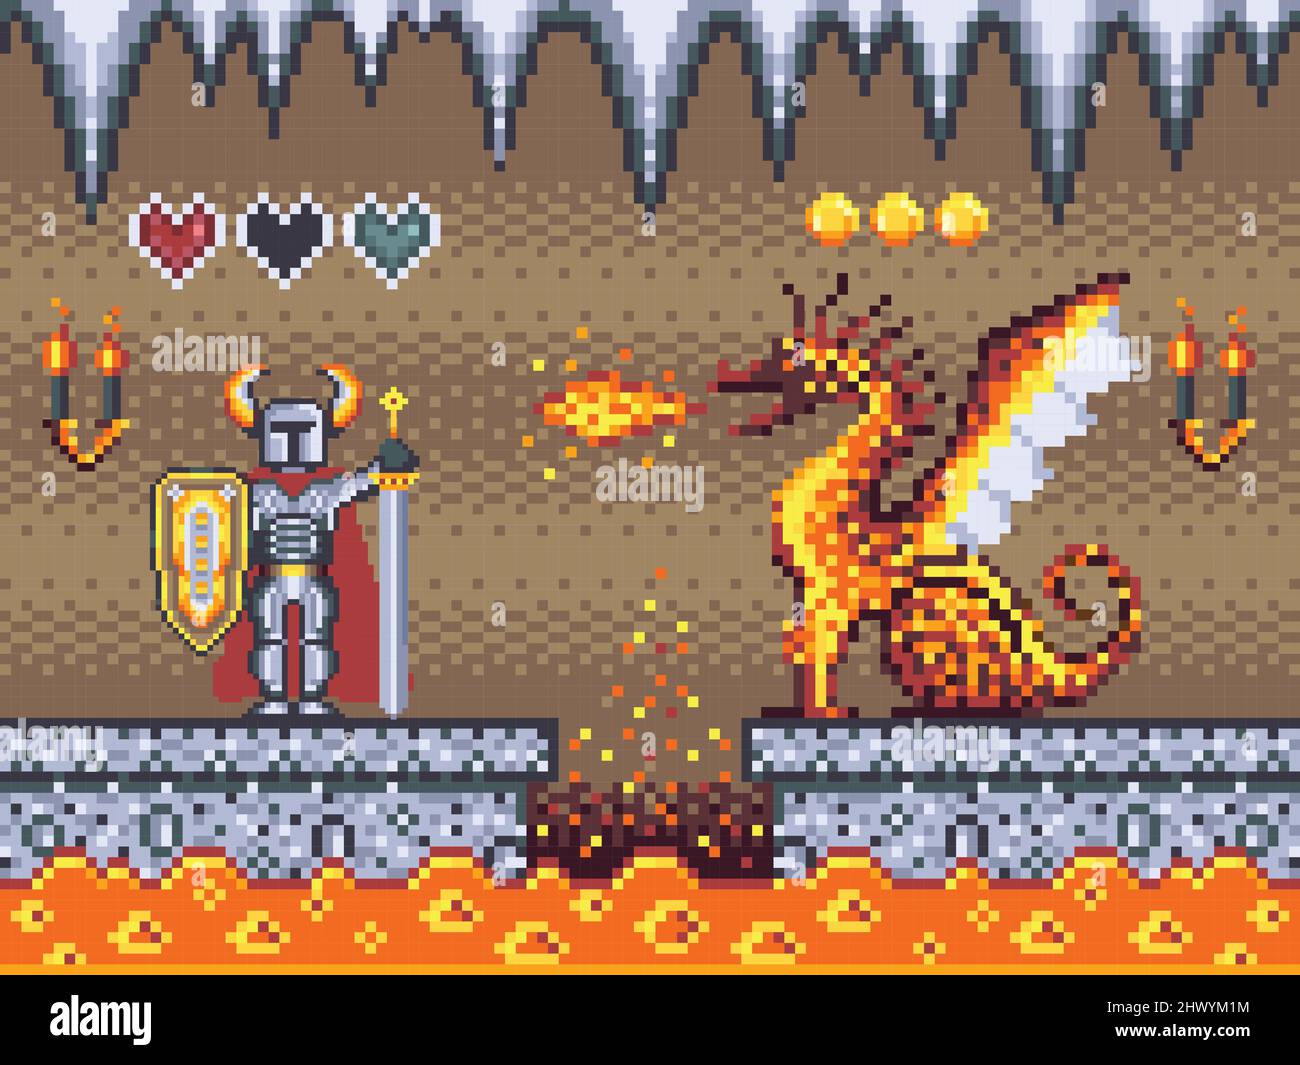 Knight and Dragon on Dungeon Game Location Stock Vector